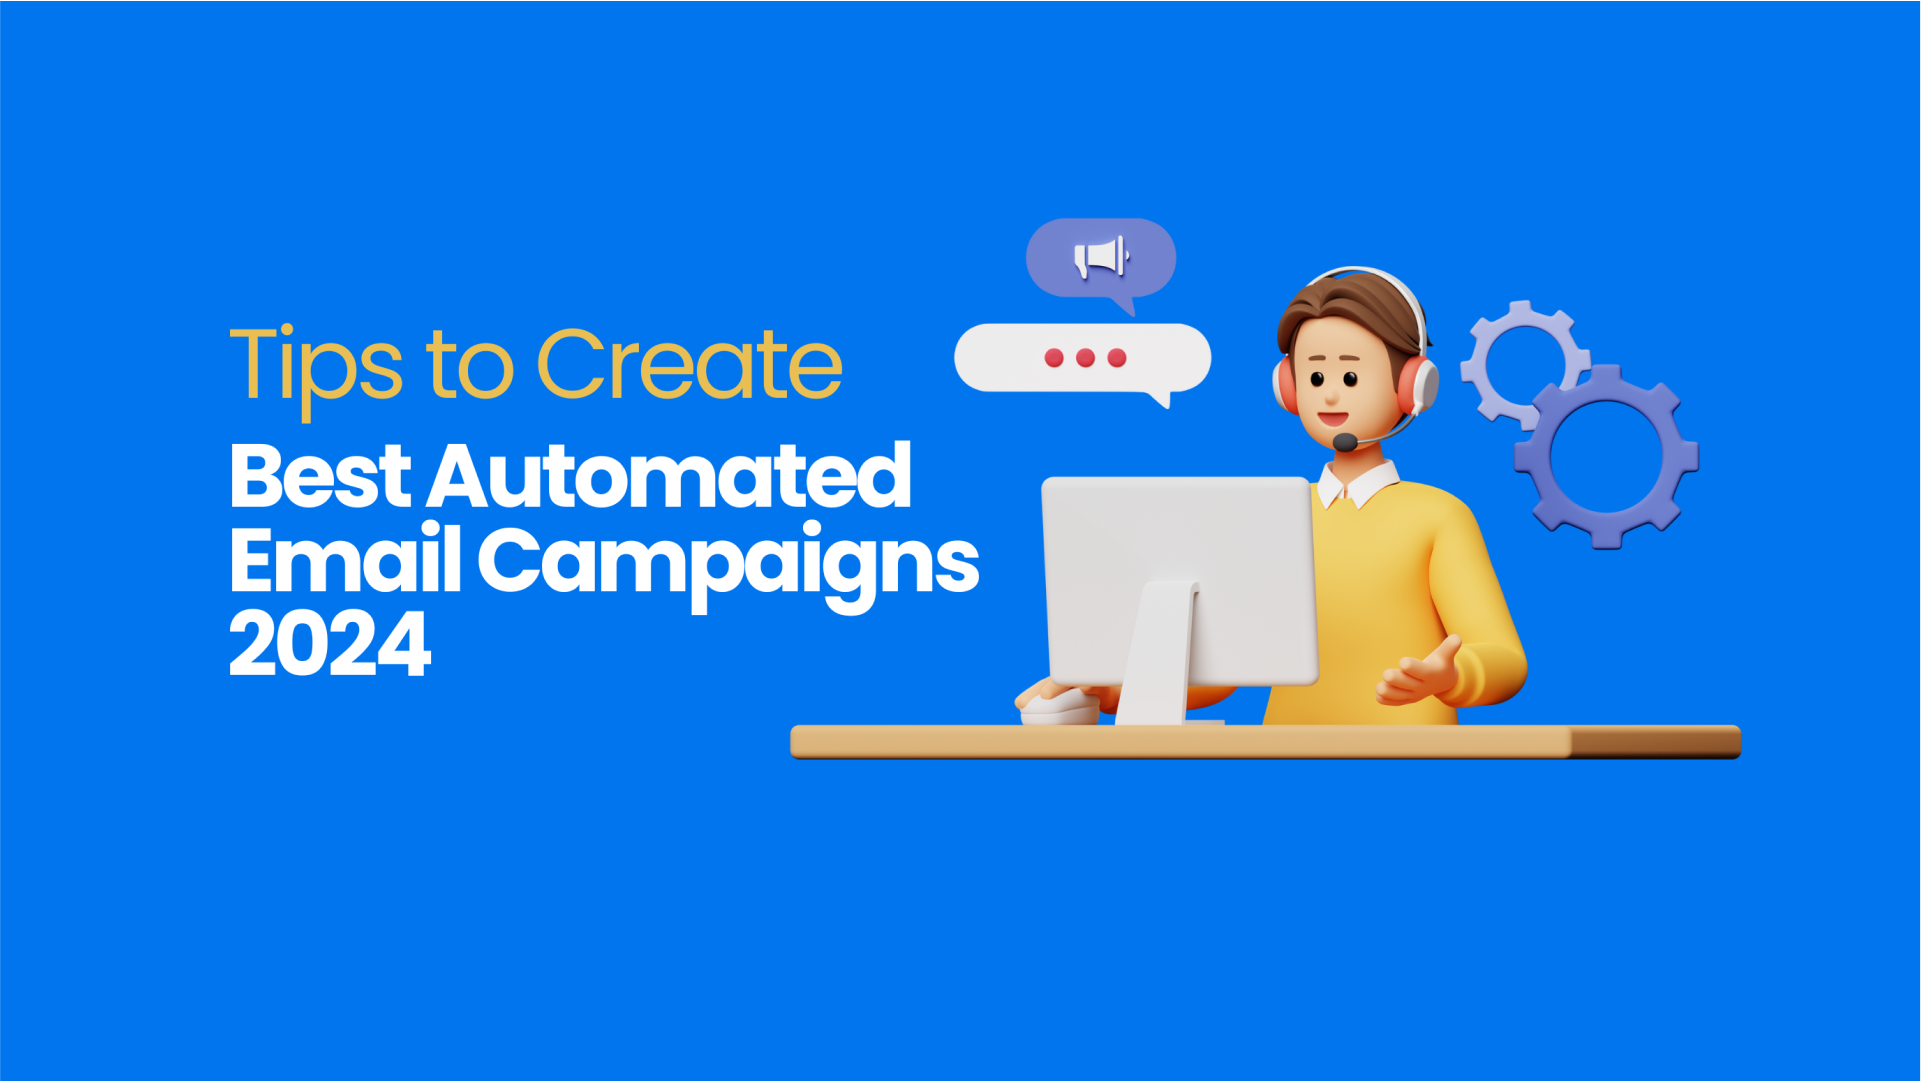 Tips to Create The Best Automated Email Campaigns